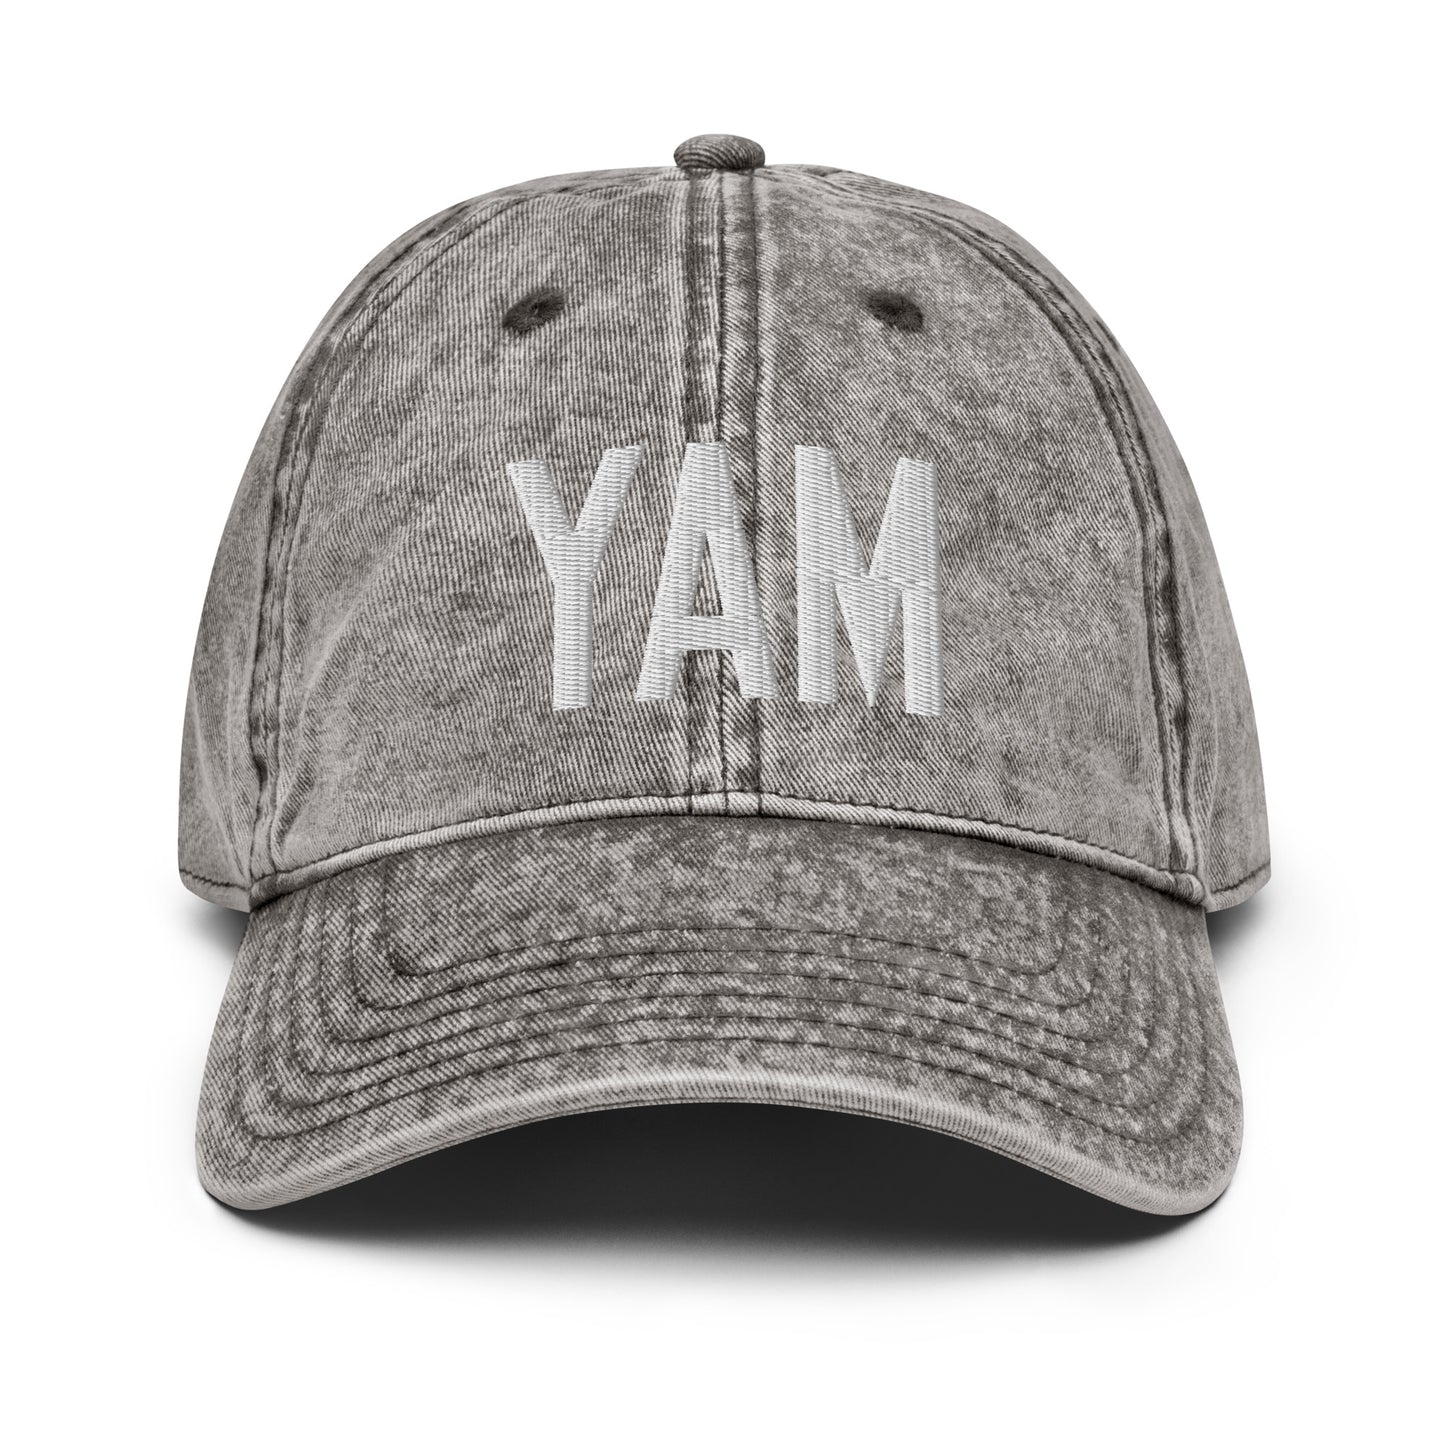 Airport Code Twill Cap - White • YAM Sault-Ste-Marie • YHM Designs - Image 28